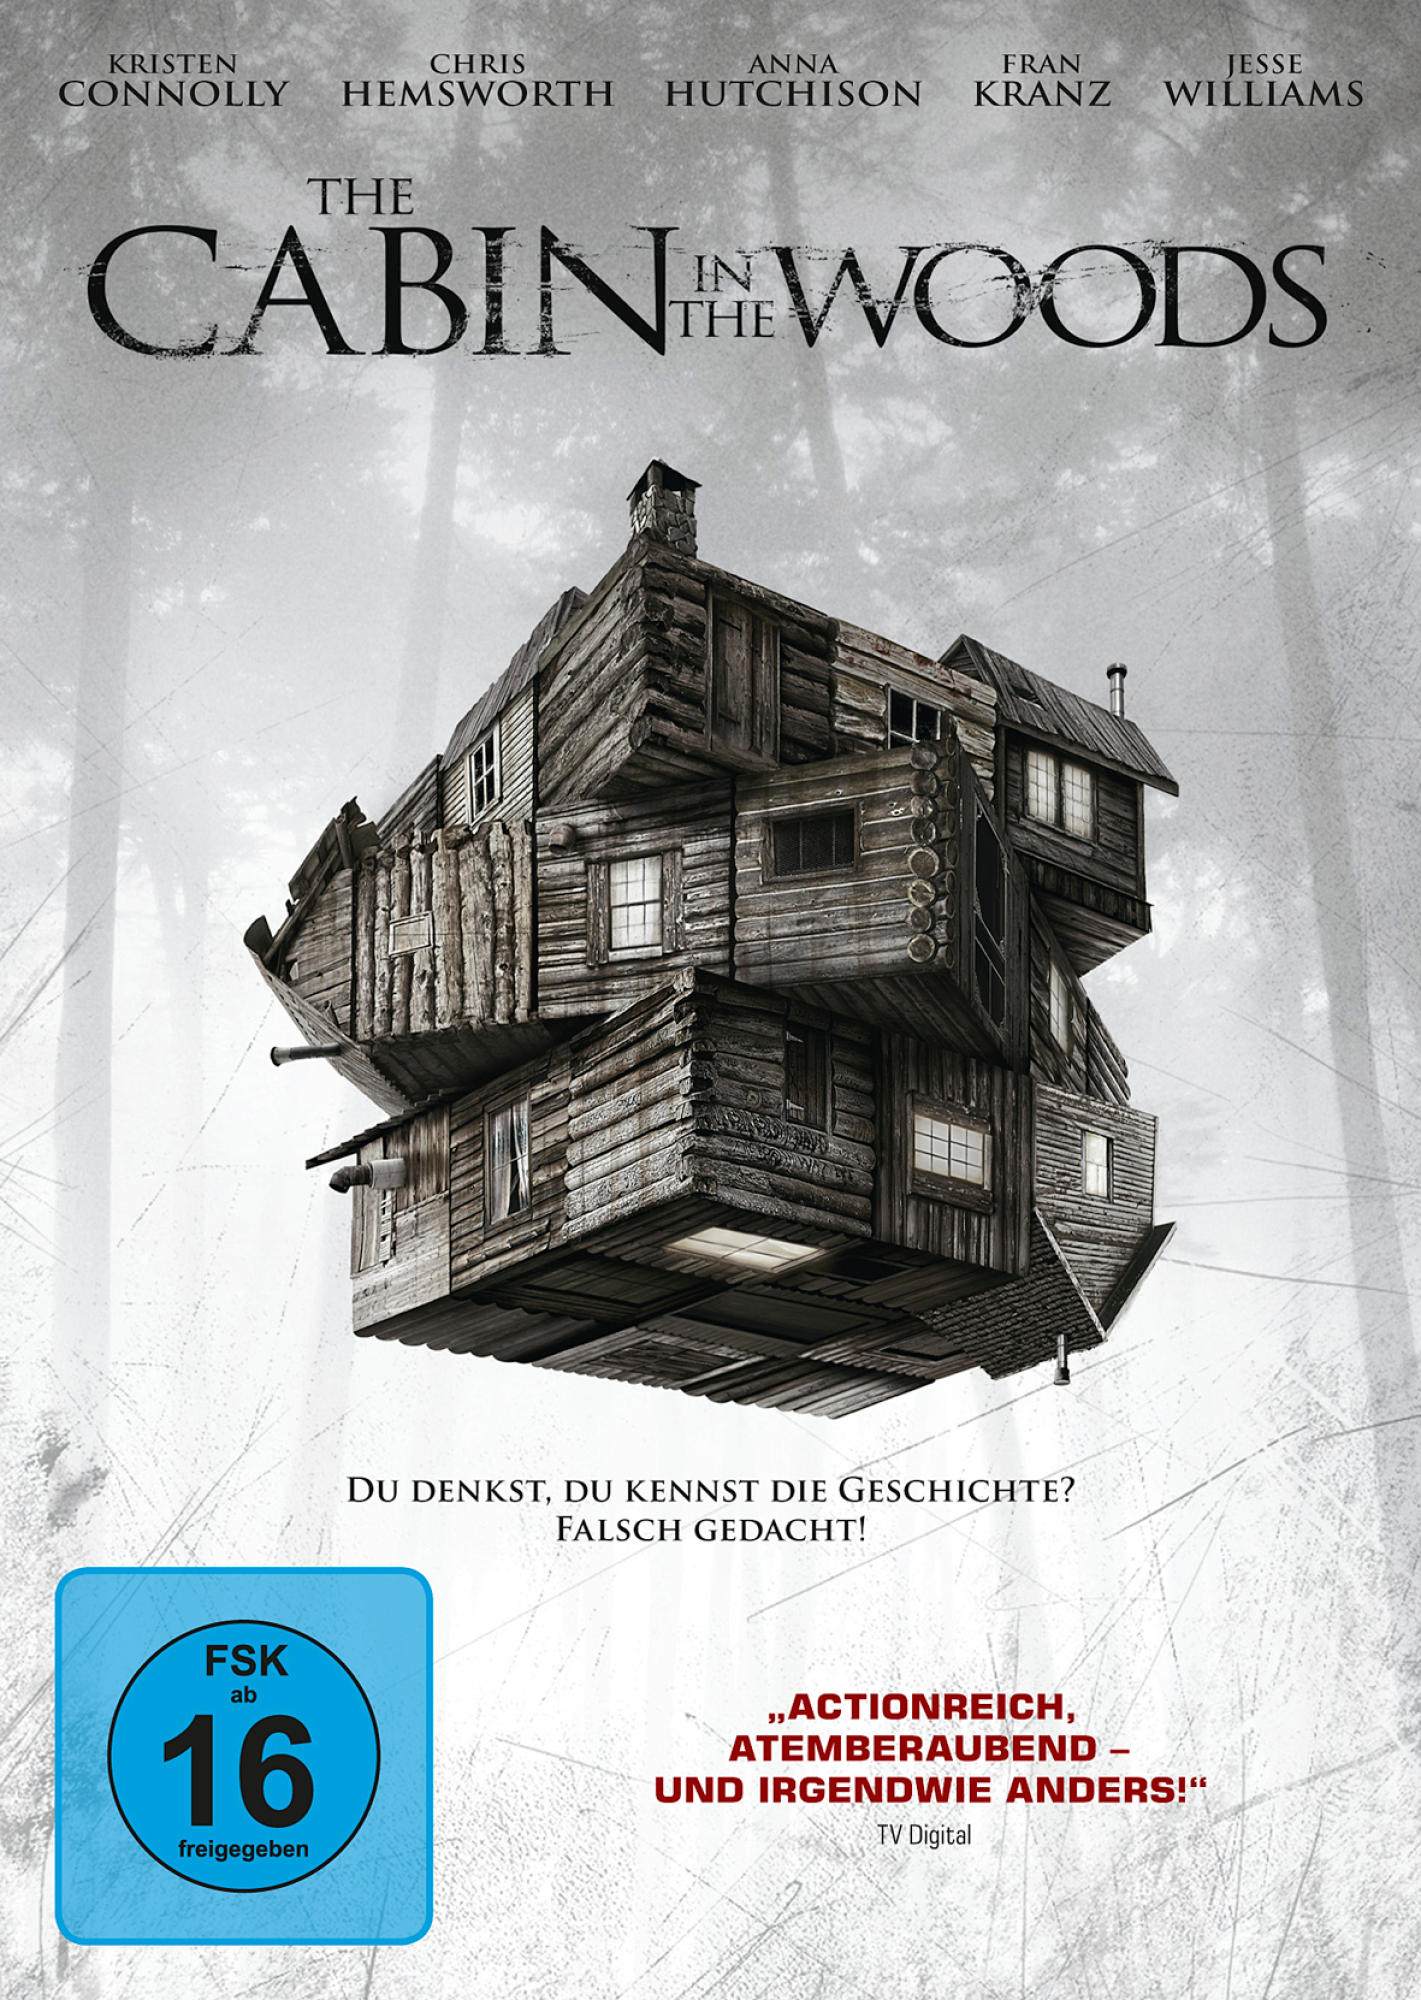 in The Woods Cabin DVD the